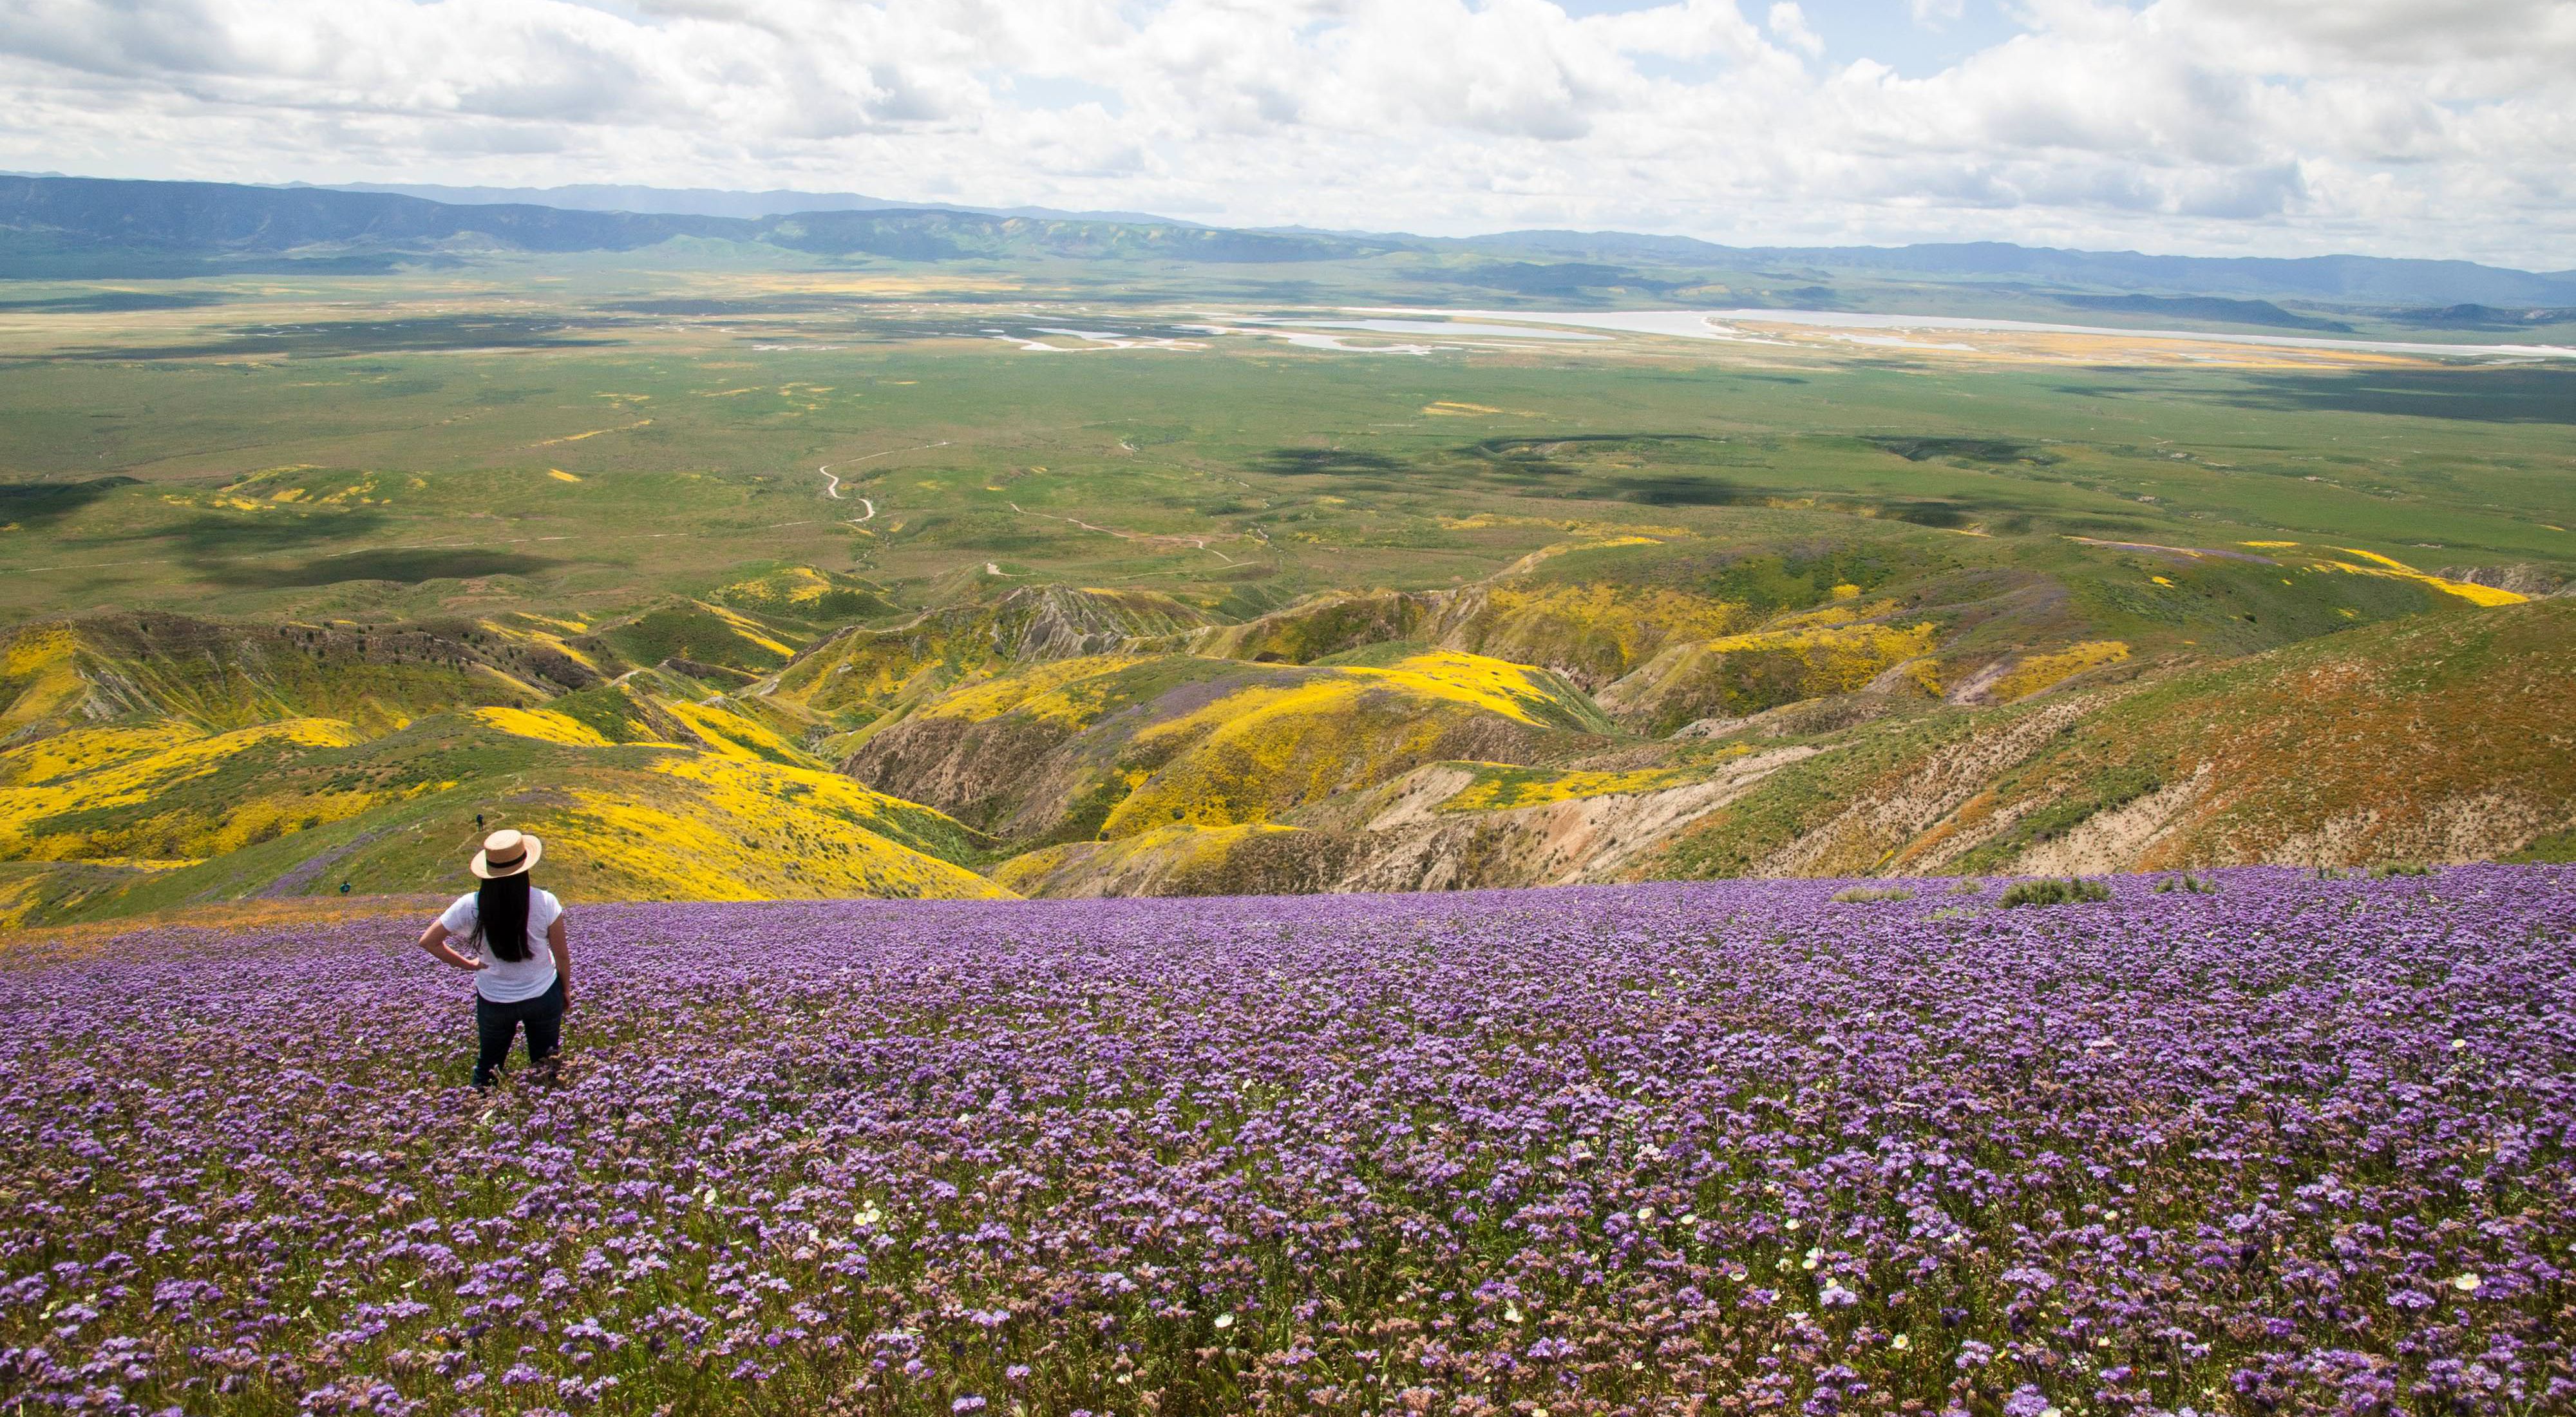 A woman stands in a field of purple flowers looking out over a broad, green sloping plain.